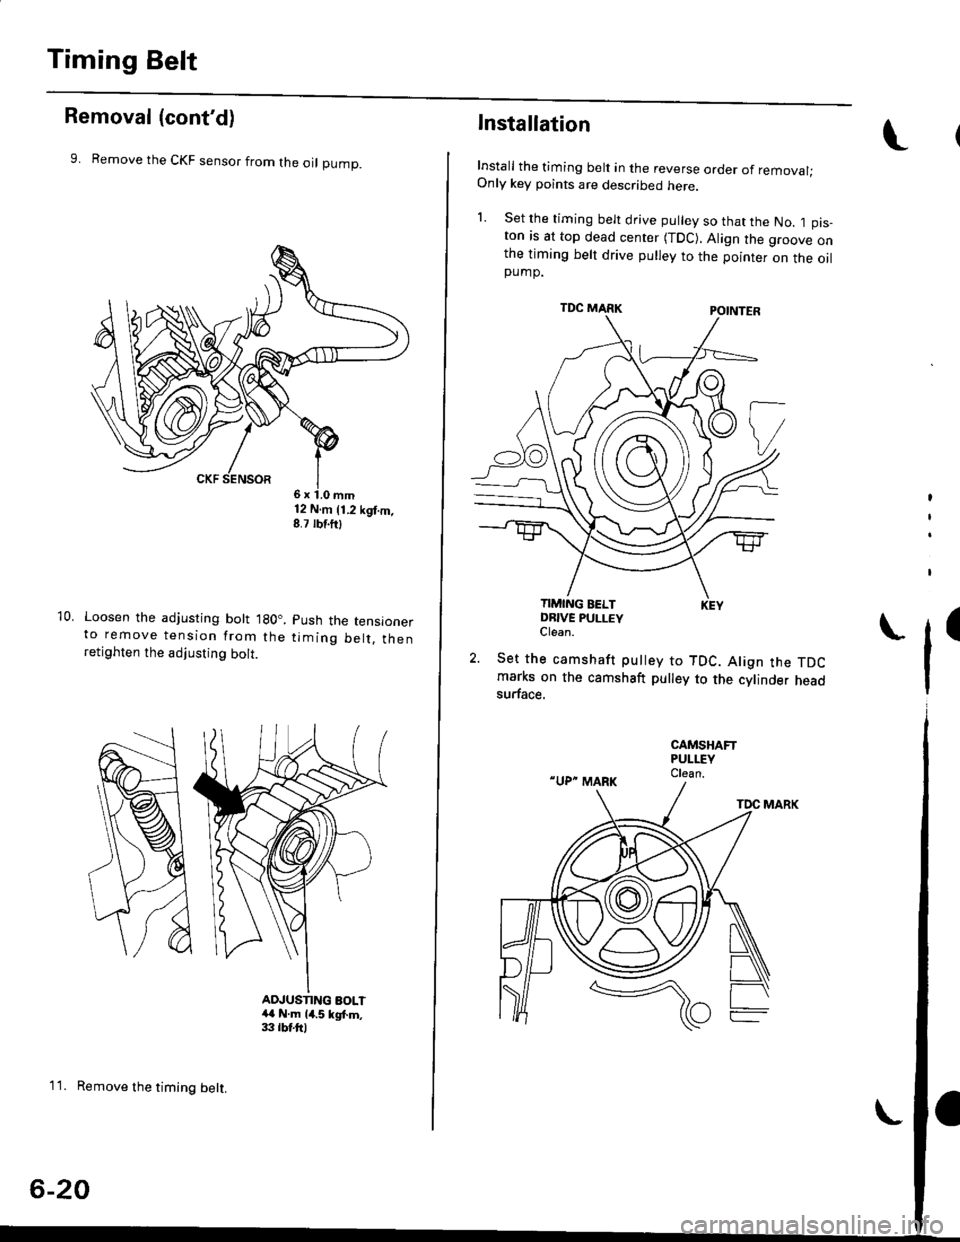 HONDA CIVIC 2000 6.G Workshop Manual Timing Belt
Removal (contd)
9. Remove the CKF sensor from the oI pump.
10. Loosen the adjusting bott lgO..to remove tension from theretighten the adjusting bolt.
12 N.m 11.2 kgt.m,8.7 rbf.ftl
Push th